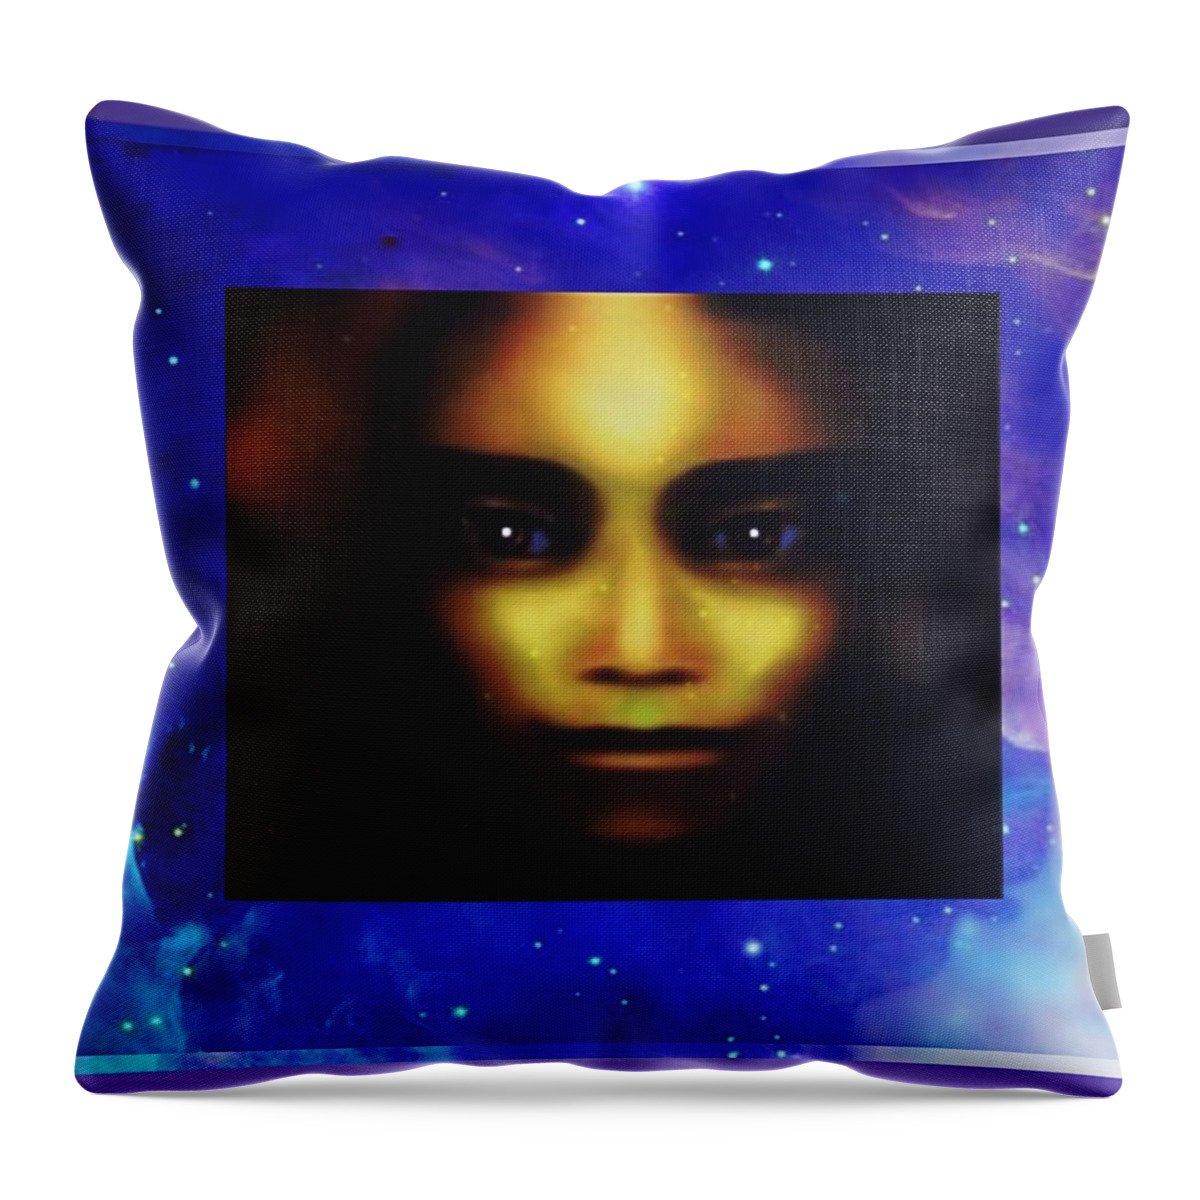 Portrait Throw Pillow featuring the mixed media Portrait #3 by Hartmut Jager